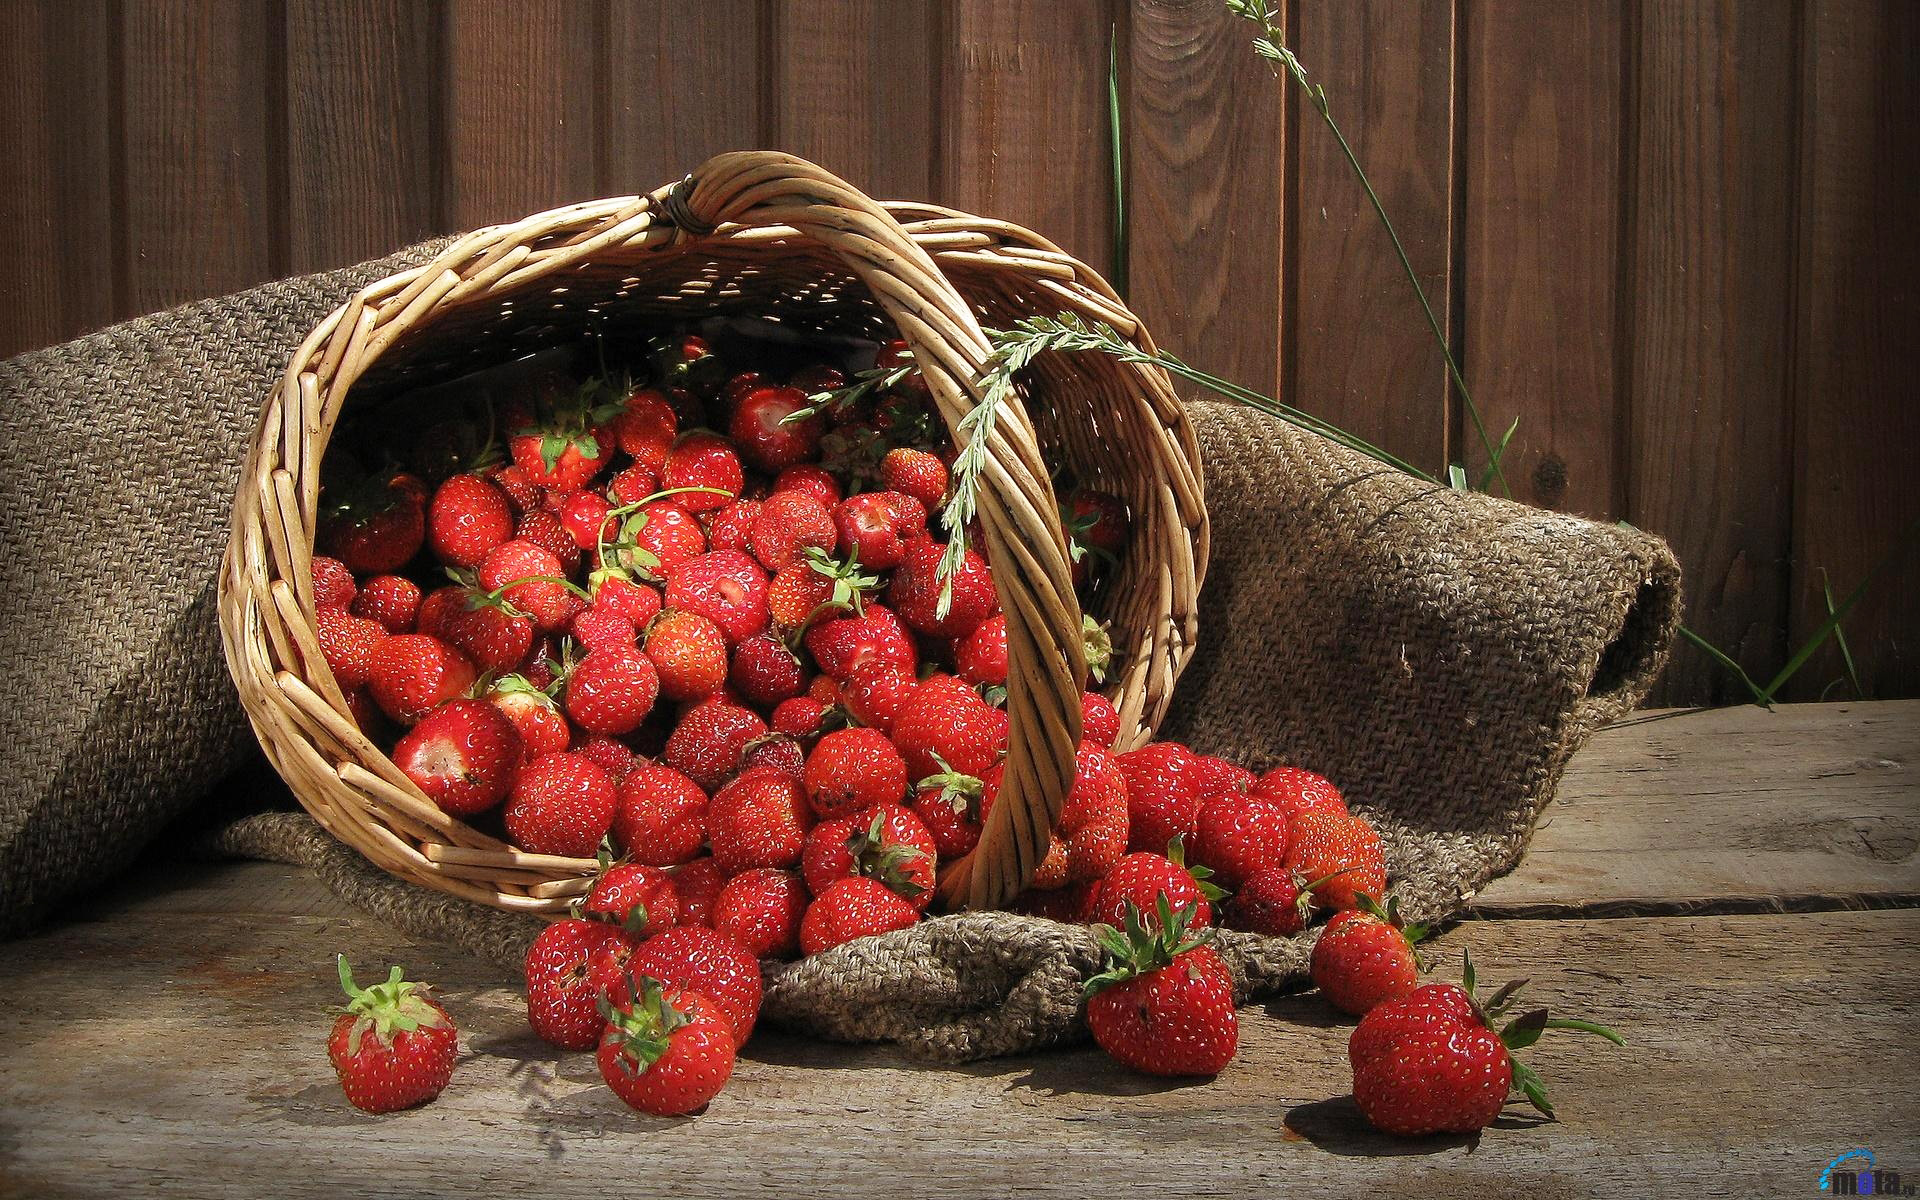 fruit wallpaper,natural foods,fruit,still life photography,strawberries,strawberry